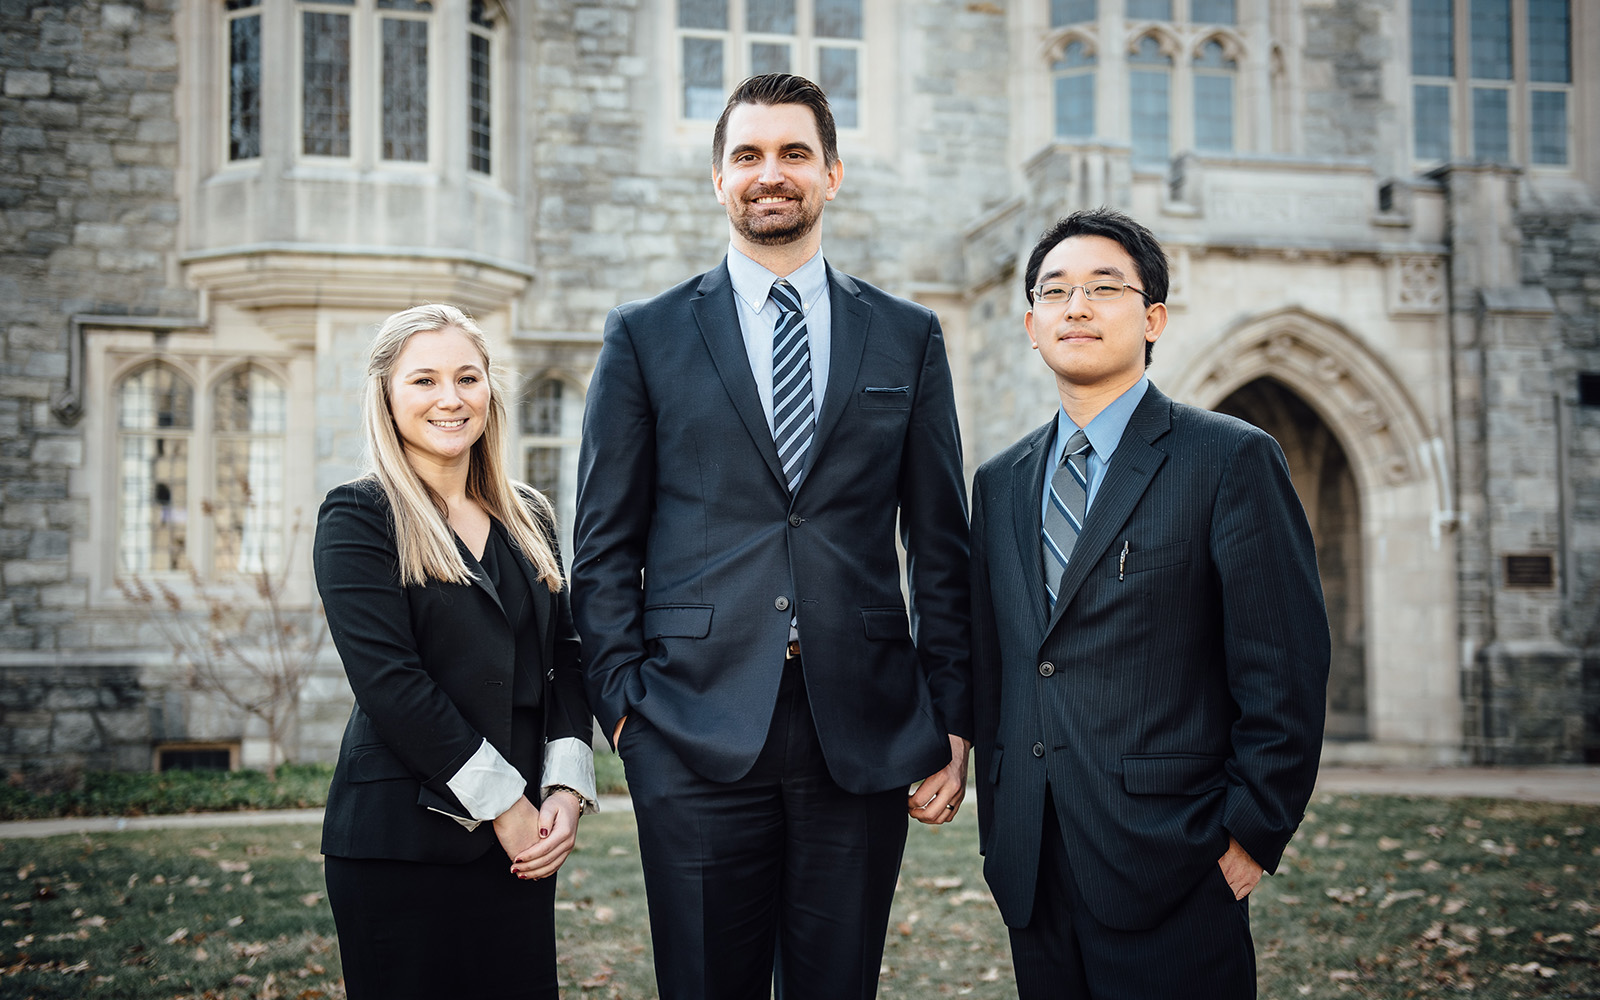 The winning team of the 4th Annual Business/Law Negotiation Competition. From left: Brooke Tinnerello '17, UConn law student, Christopher DiGiacomo '18 MBA, and Steven Lin, UConn law student. (Nathan Oldham/UConn School of Business)